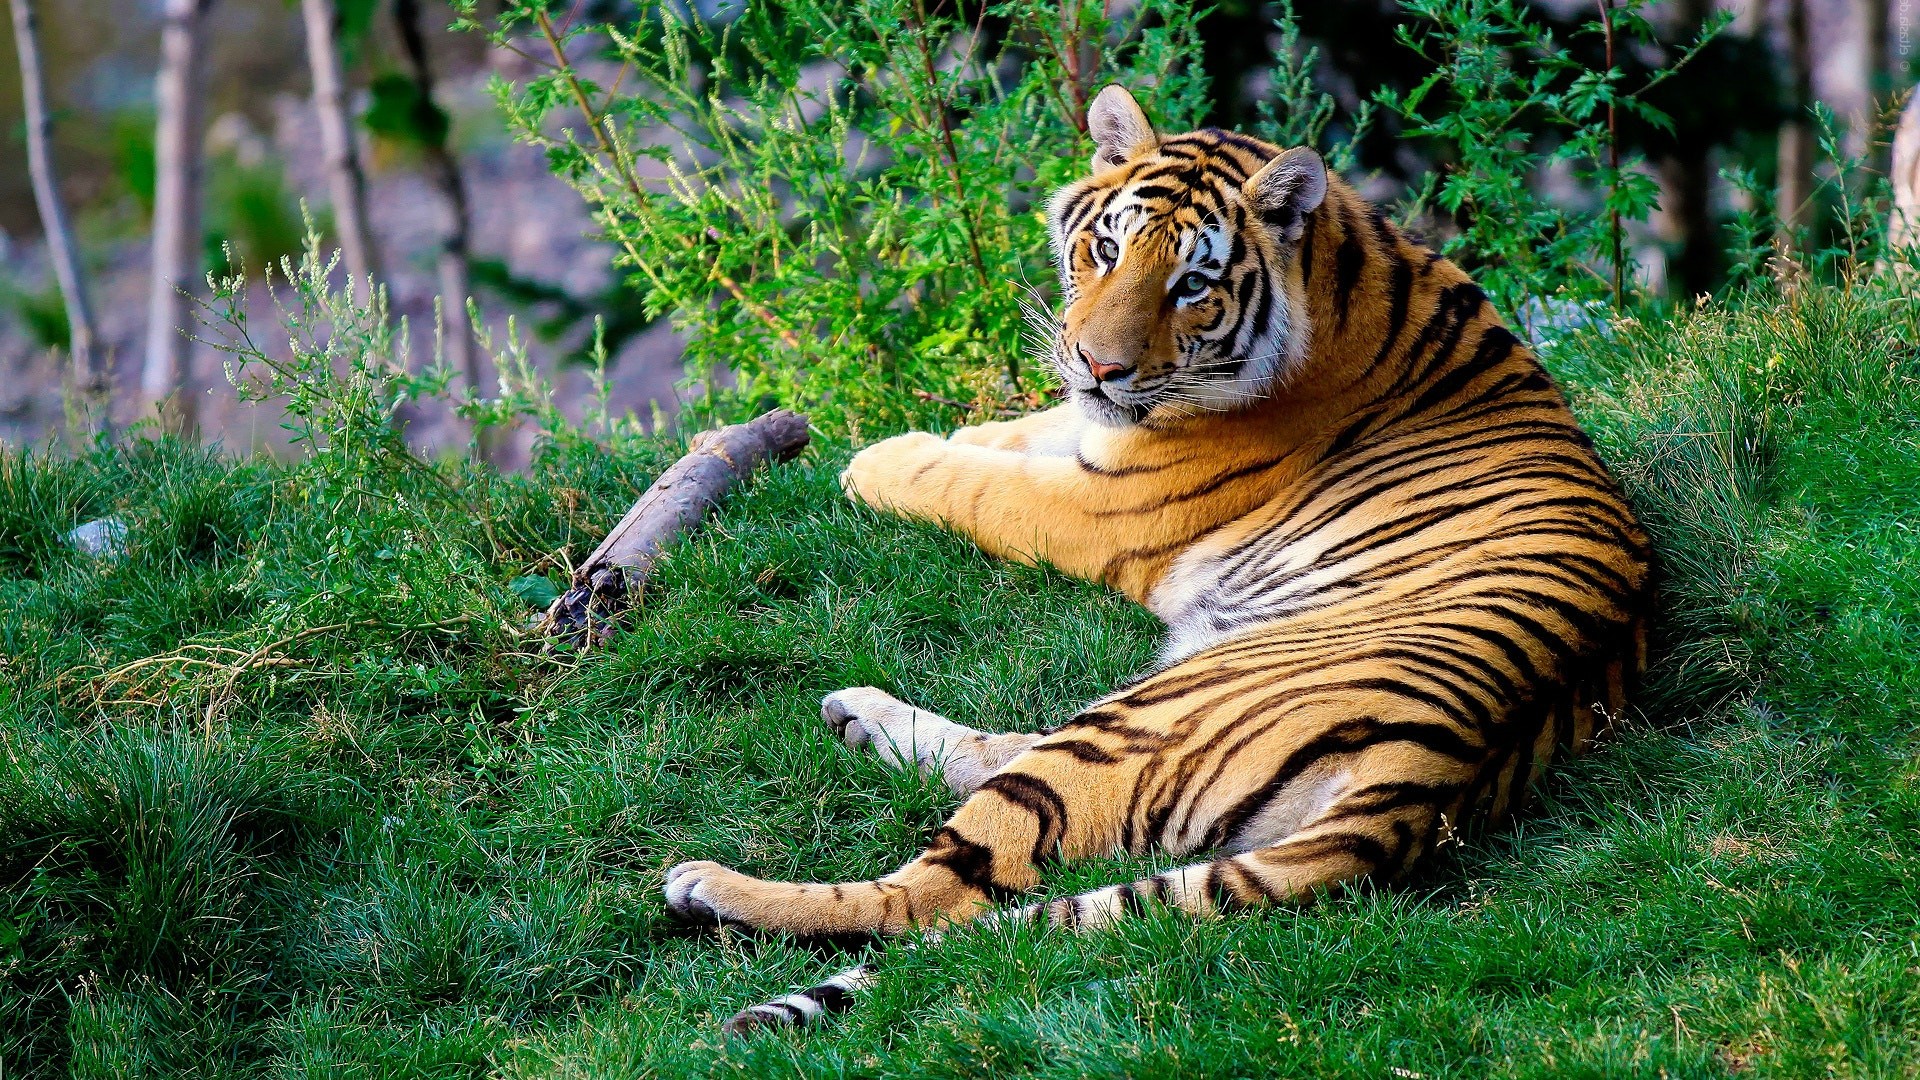 Bengal Tiger Photography Hd Wallpapers Collection - Tiger With Gold Tooth - HD Wallpaper 